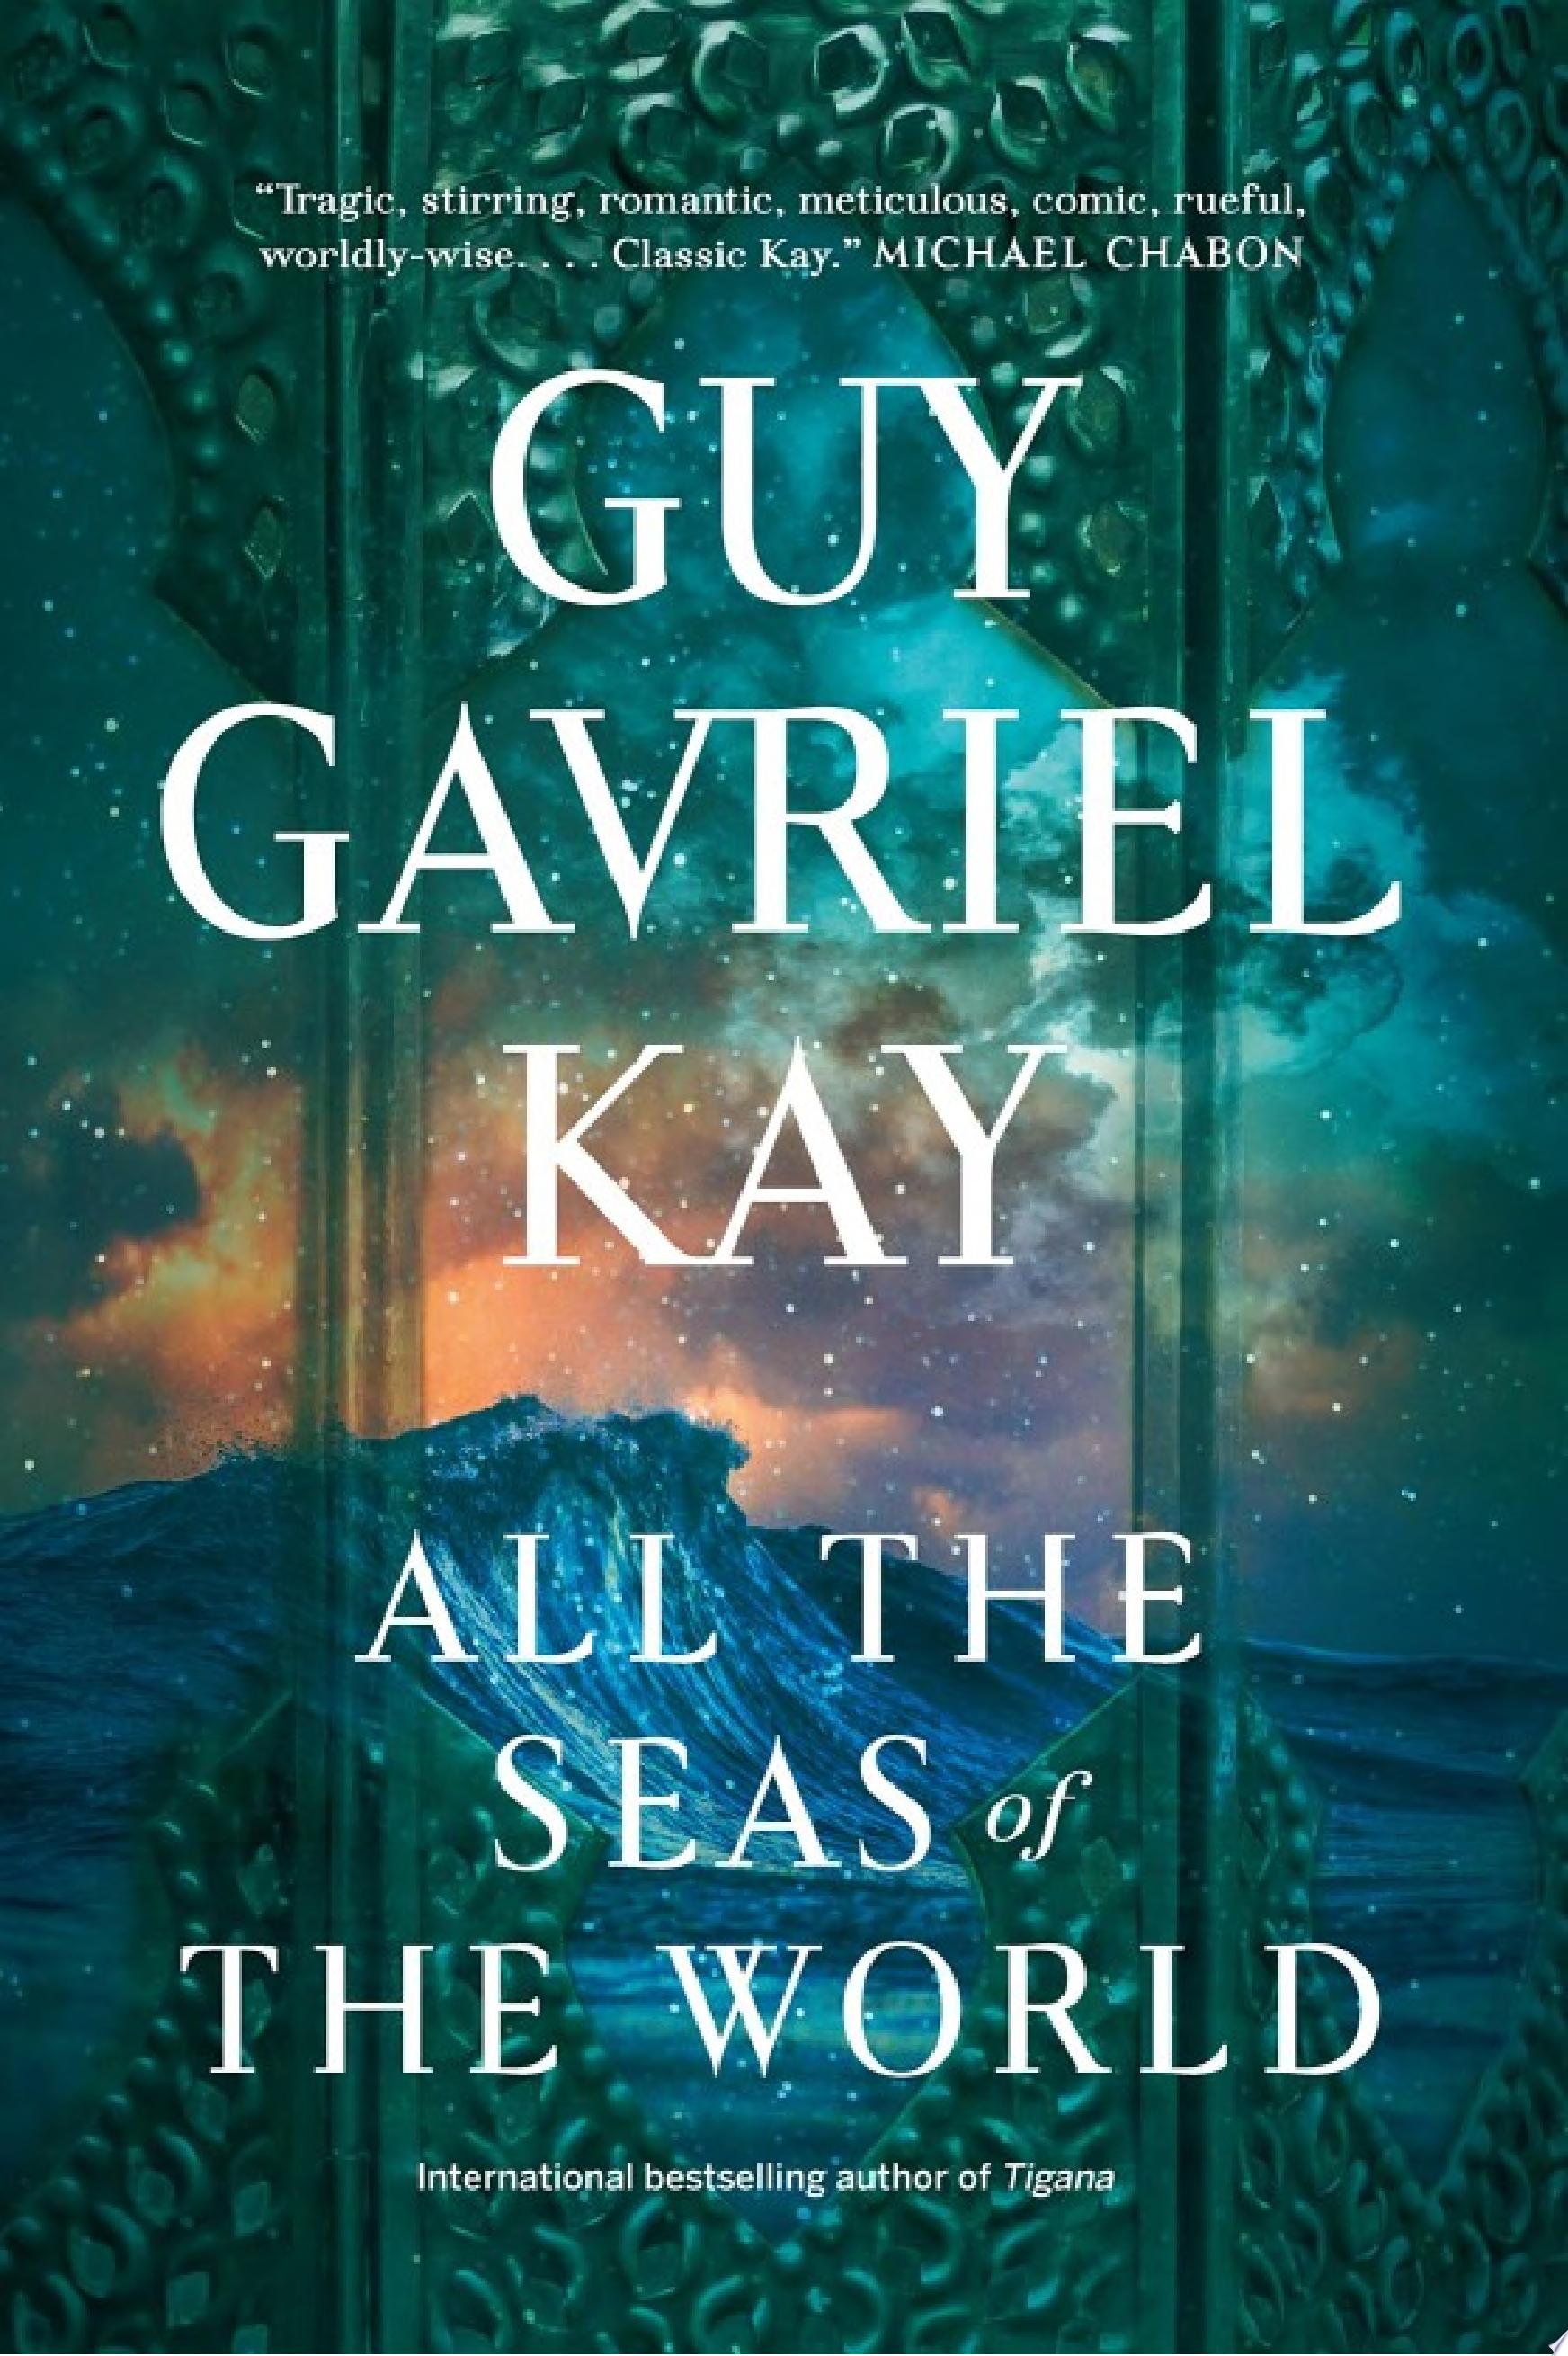 Image for "All the Seas of the World"